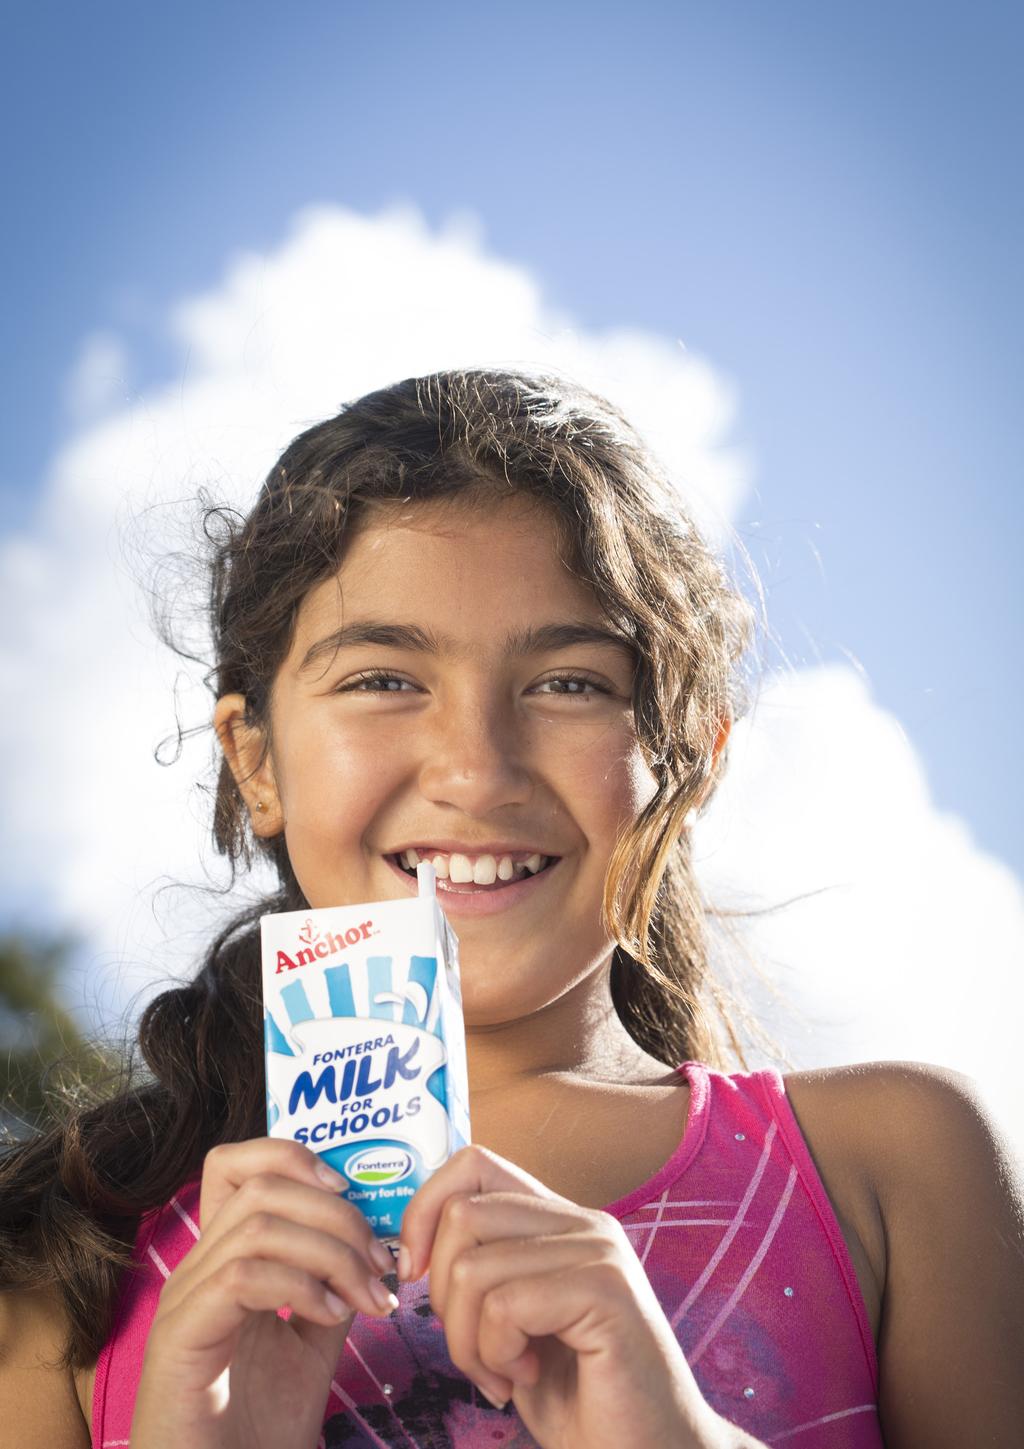 Come onboard Why join us? We all know that milk is great for growing kids and at Fonterra we are committed to making sure that all our primary school students get plenty of it.